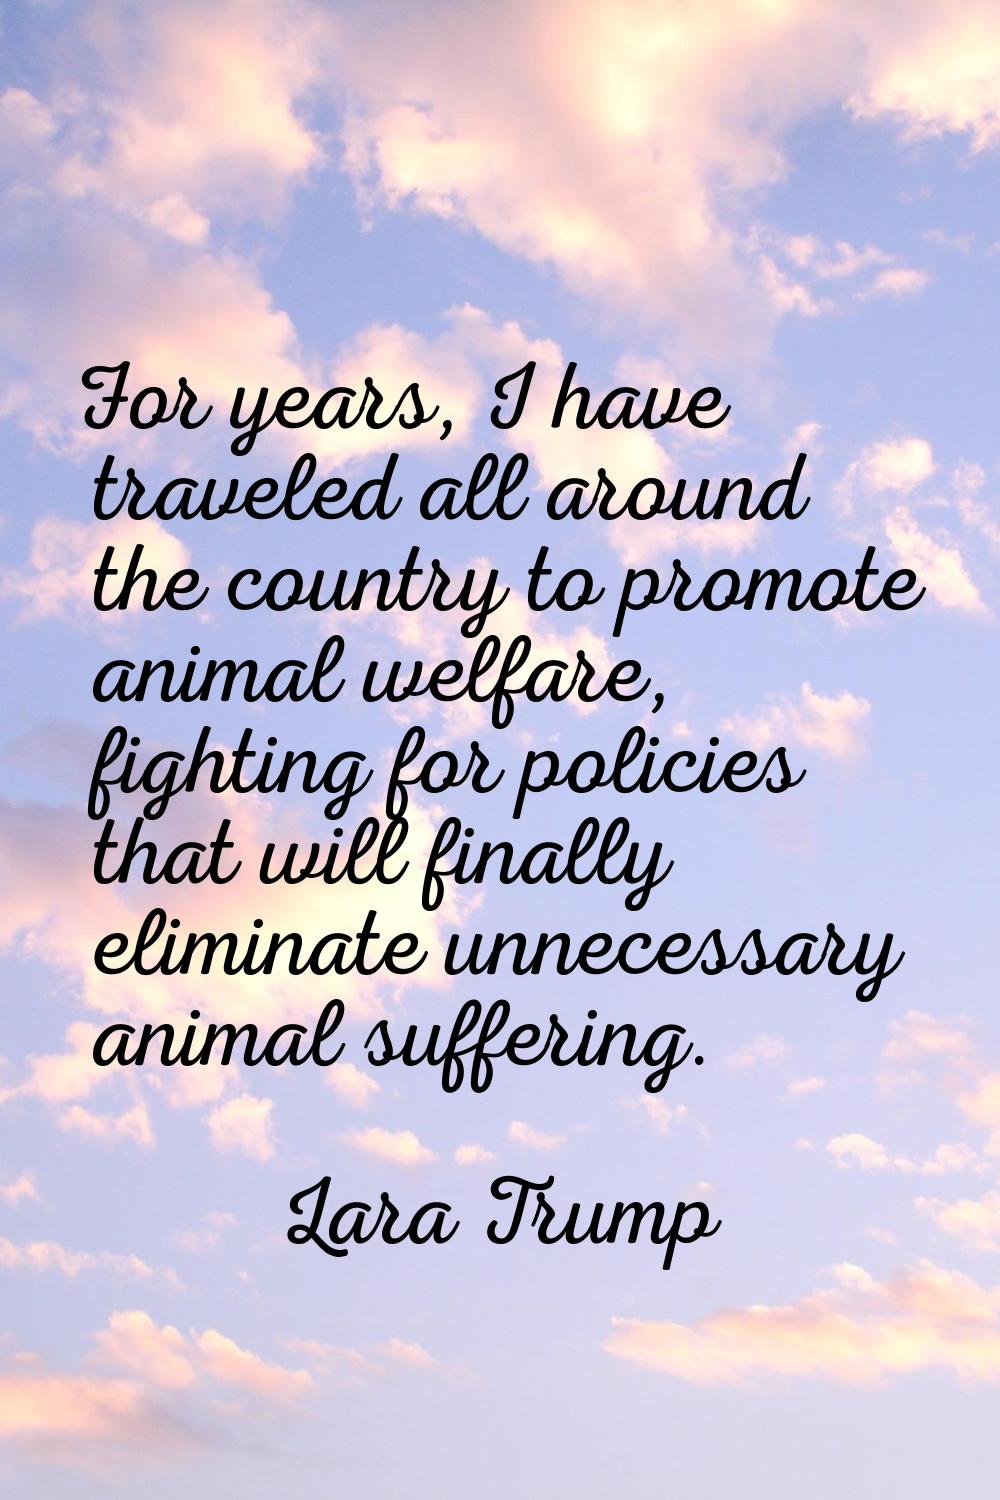 For years, I have traveled all around the country to promote animal welfare, fighting for policies 